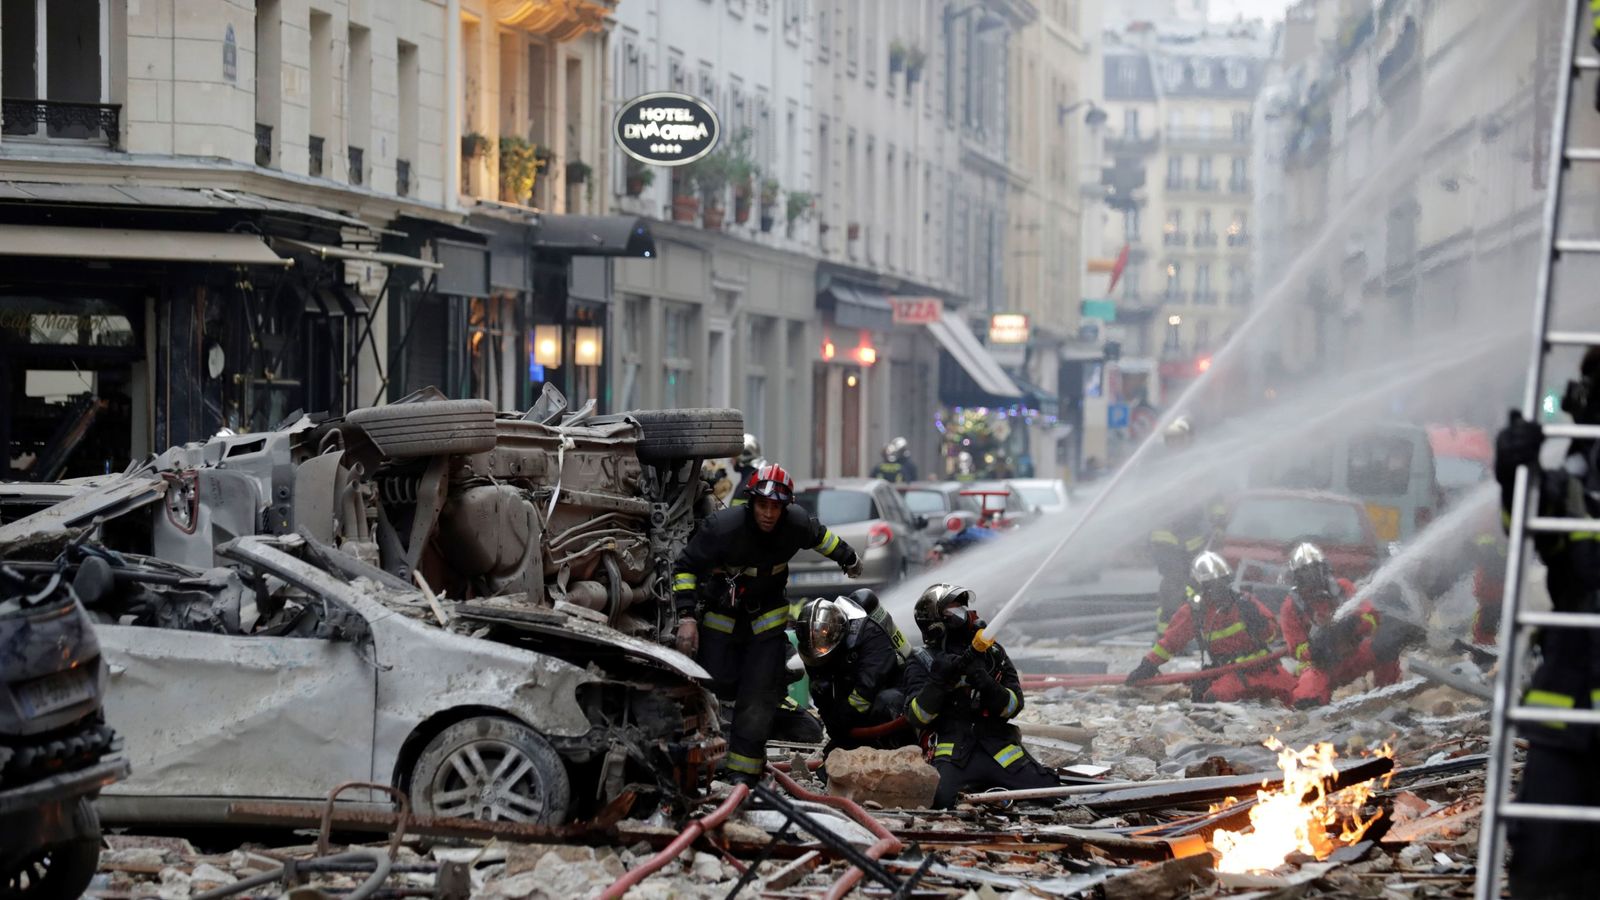 Four people killed after gas explosion in Paris